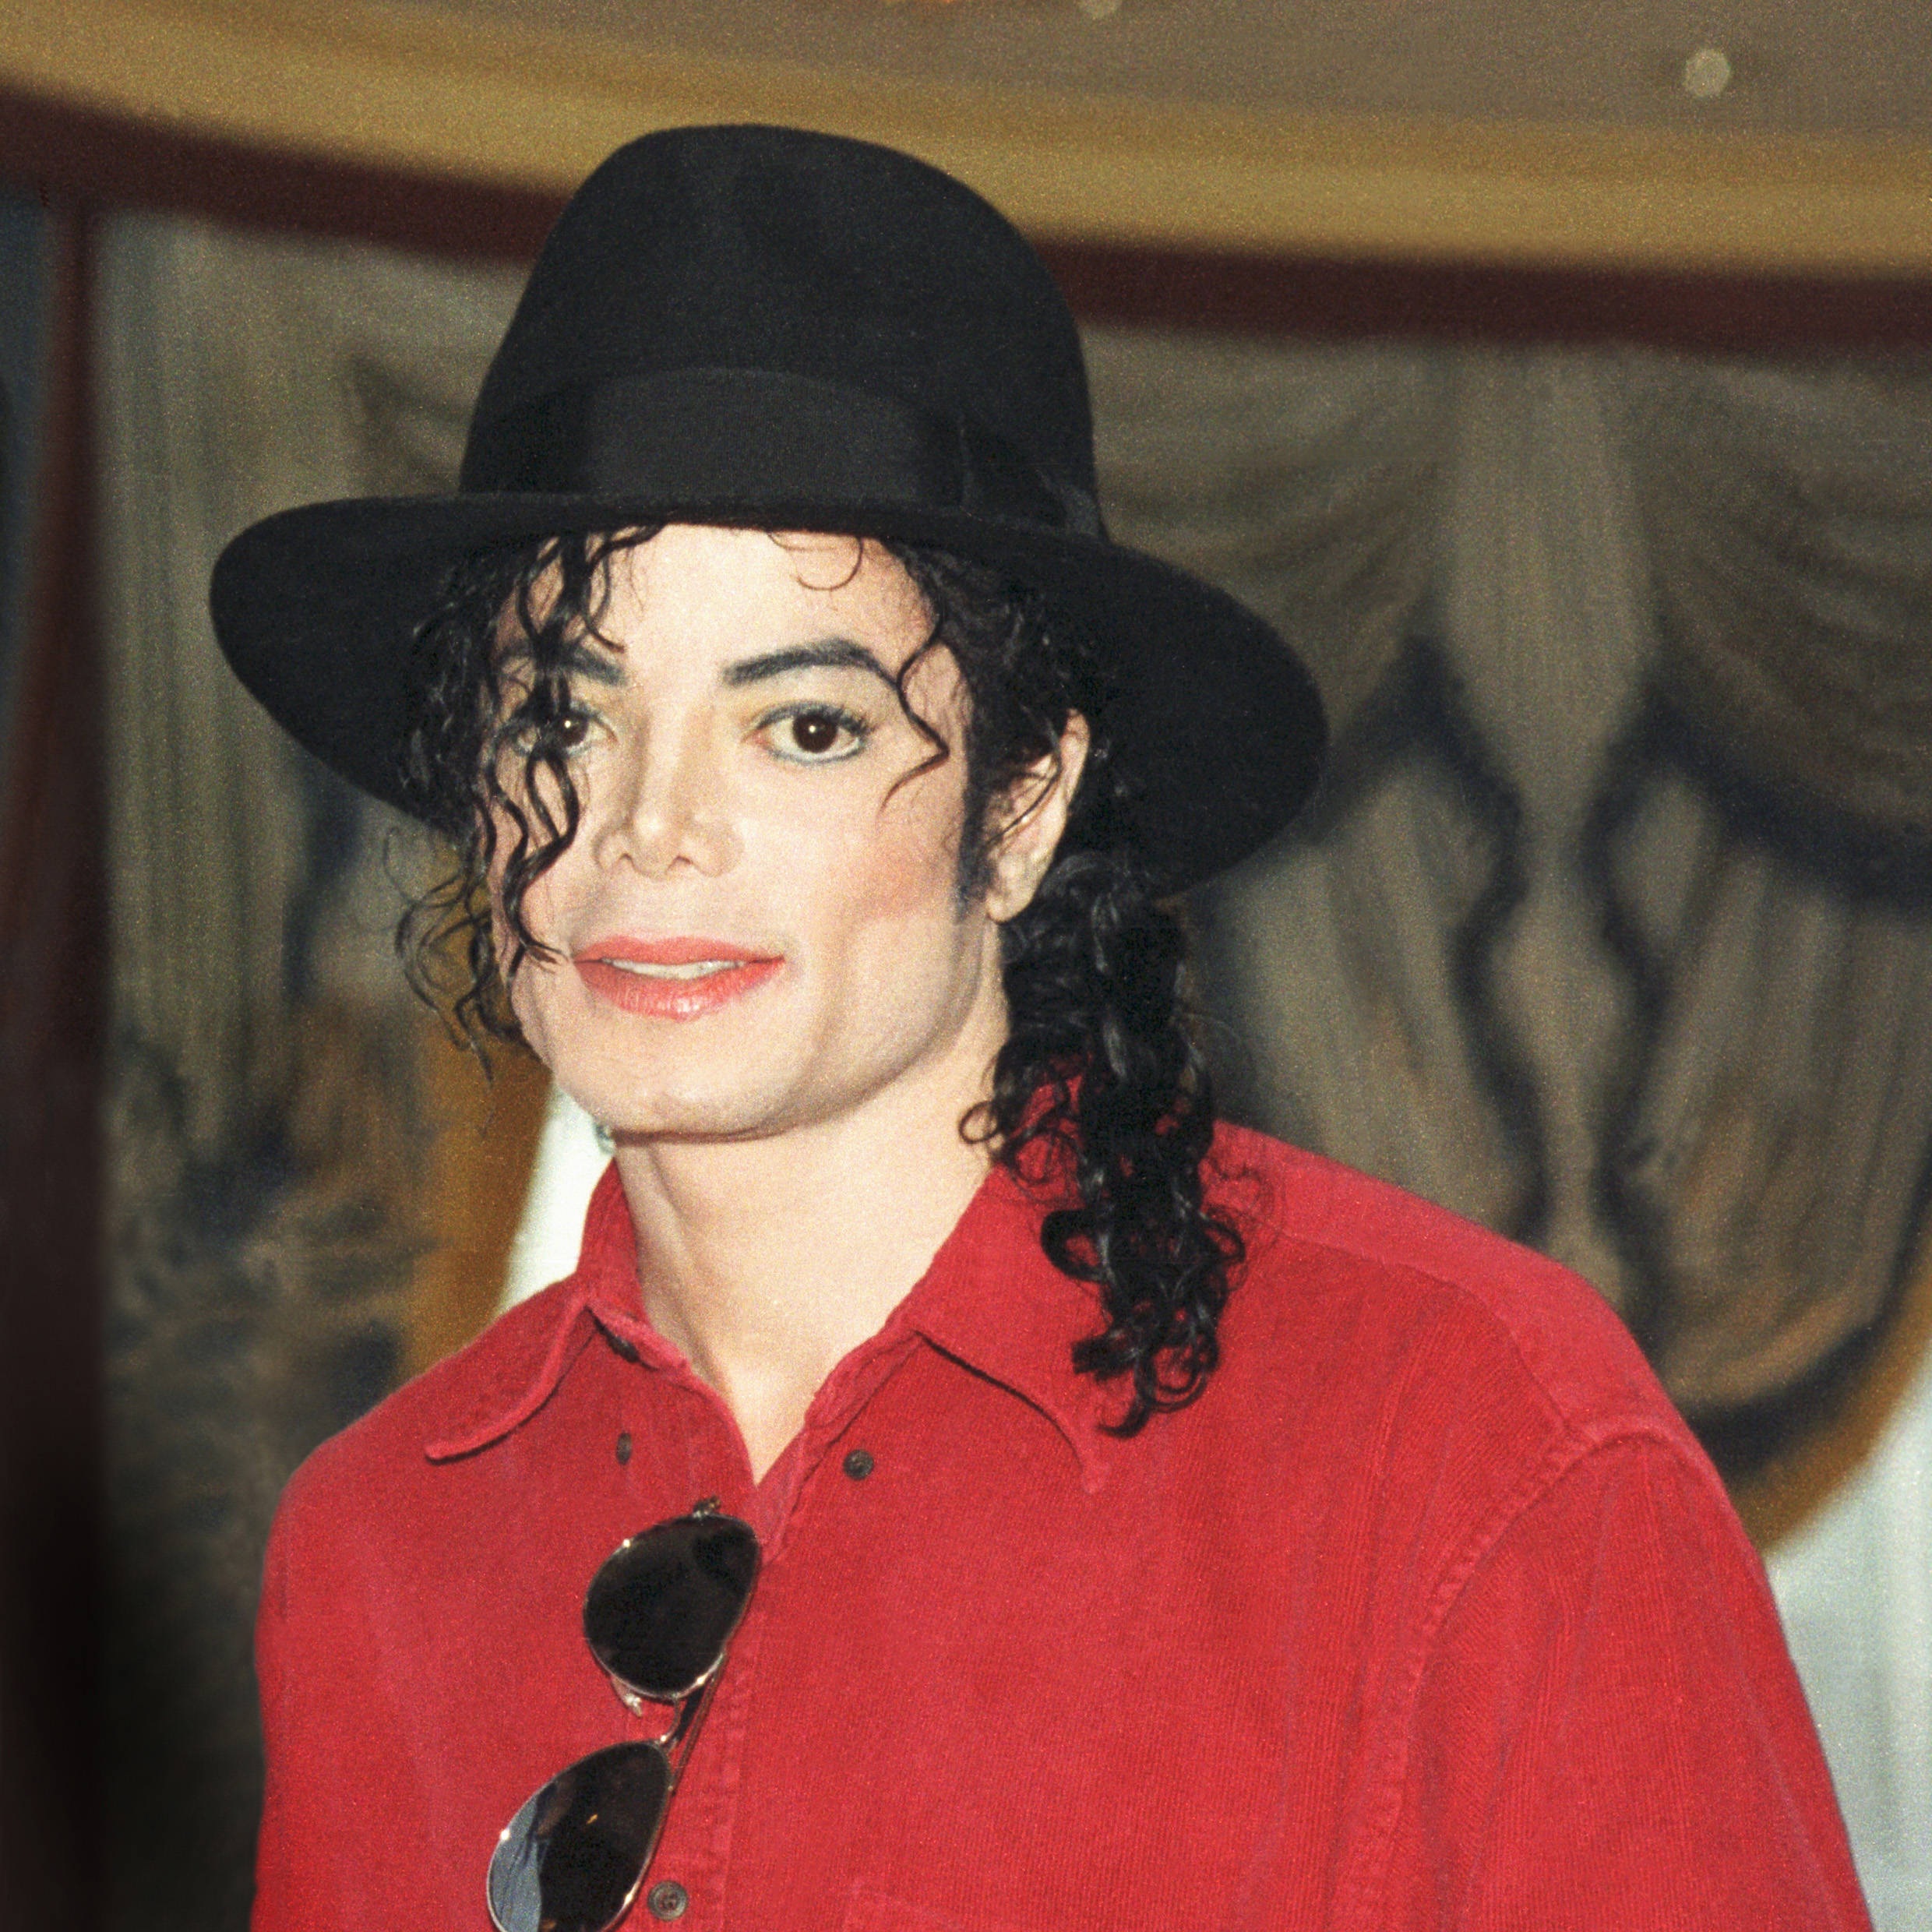 Michael Jackson's family filed a lawsuit, reclaiming assets worth 1 million USD - 2